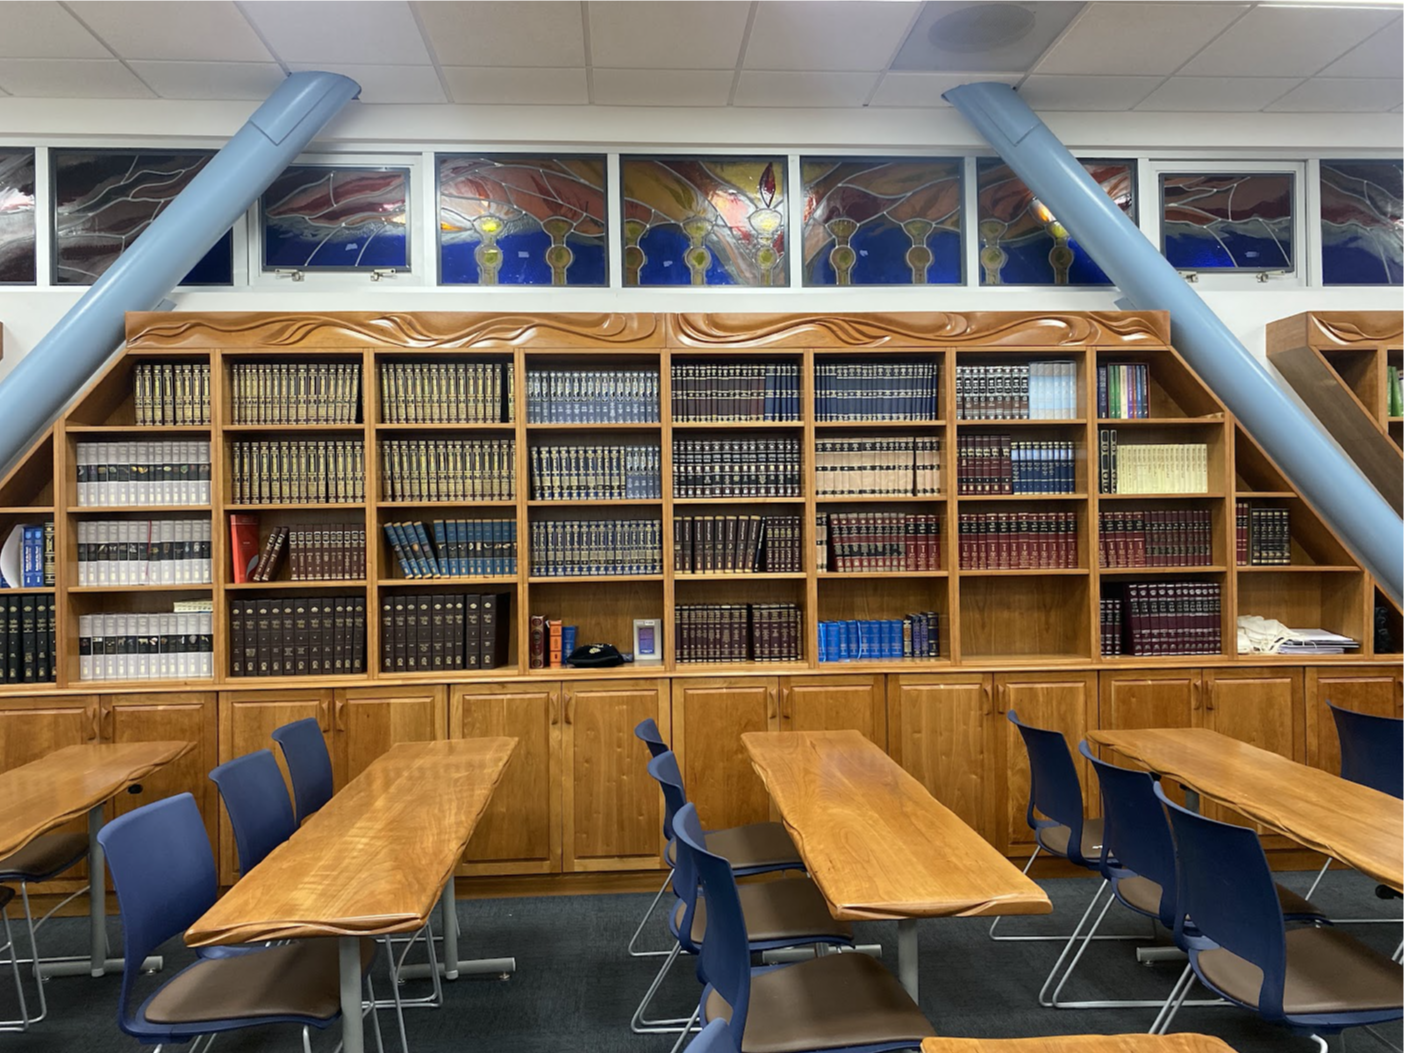 BOOKSHELVES: Sets of Shas, Mishneh Torah and commentaries on Tanach are among the many sefarim purchased to fill the Beit Midrash shelves.
